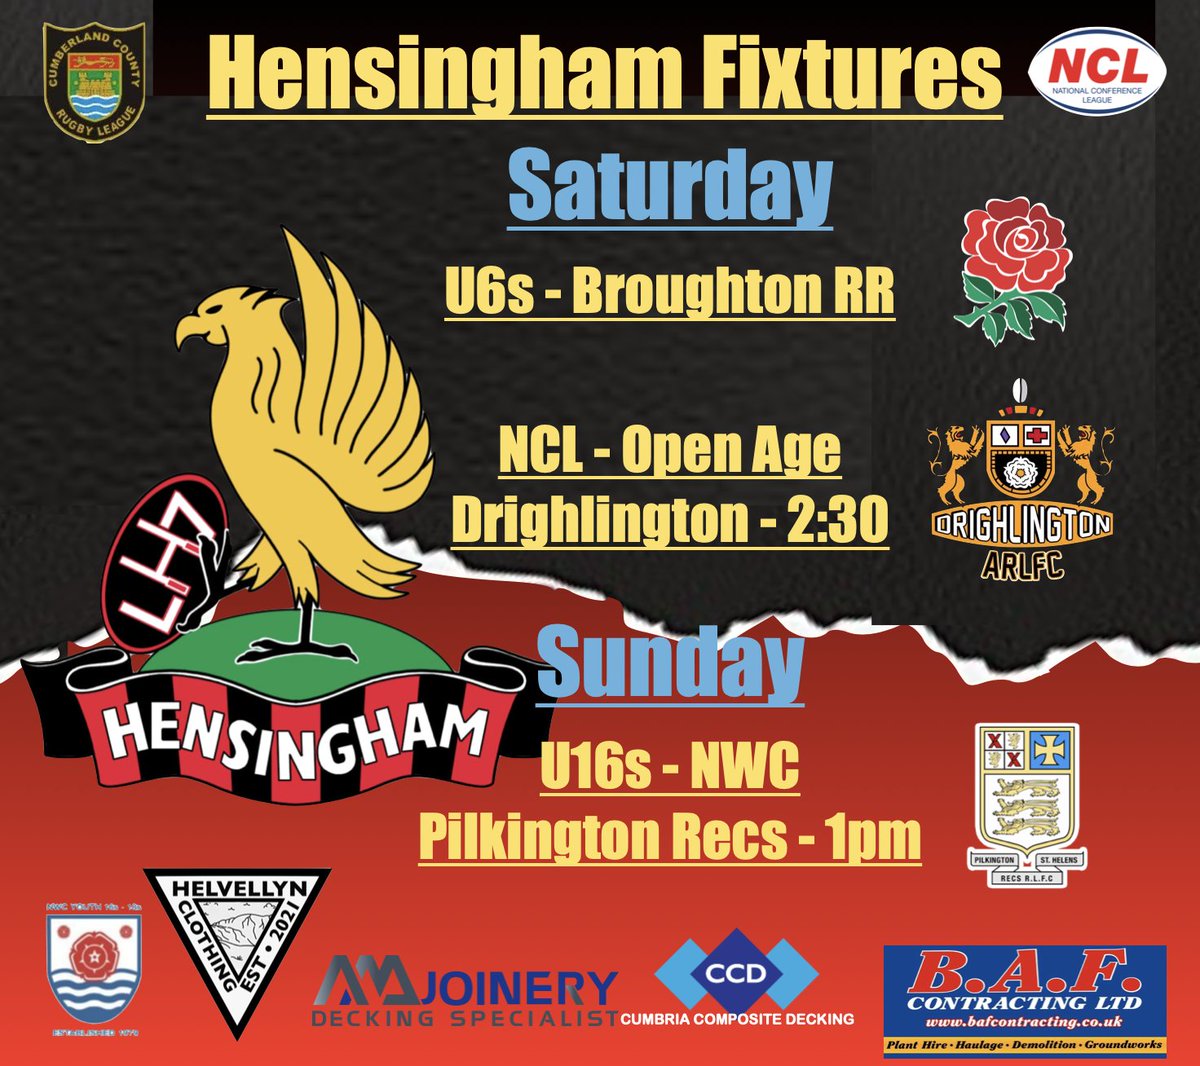 Opening times
Loads of live sport inside & outside as our U6s host Broughton RR, our @OfficialNCL side taking on @Drigrugby & our NWC U16s face @PilksRecsARLFC 
Great Weeknd of sport & a good forecast so make the most of the BH Weekend & get up & support the lads
🔴⚫️🏉☀️🍺😀